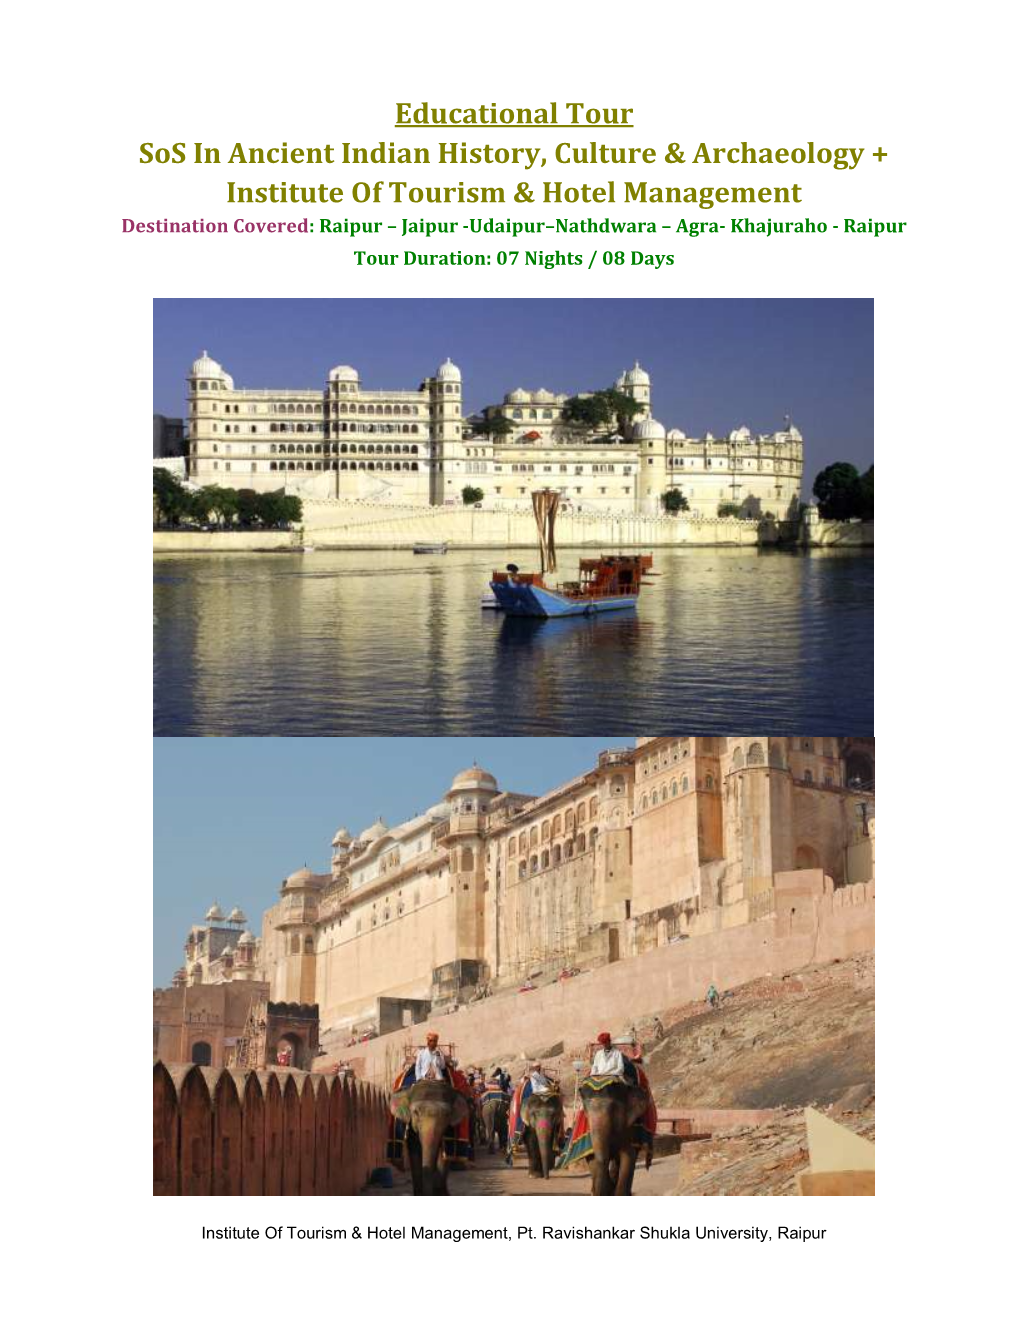 Educational Tour Sos in Ancient Indian History, Culture & Archaeology + Institute of Tourism & Hotel Management